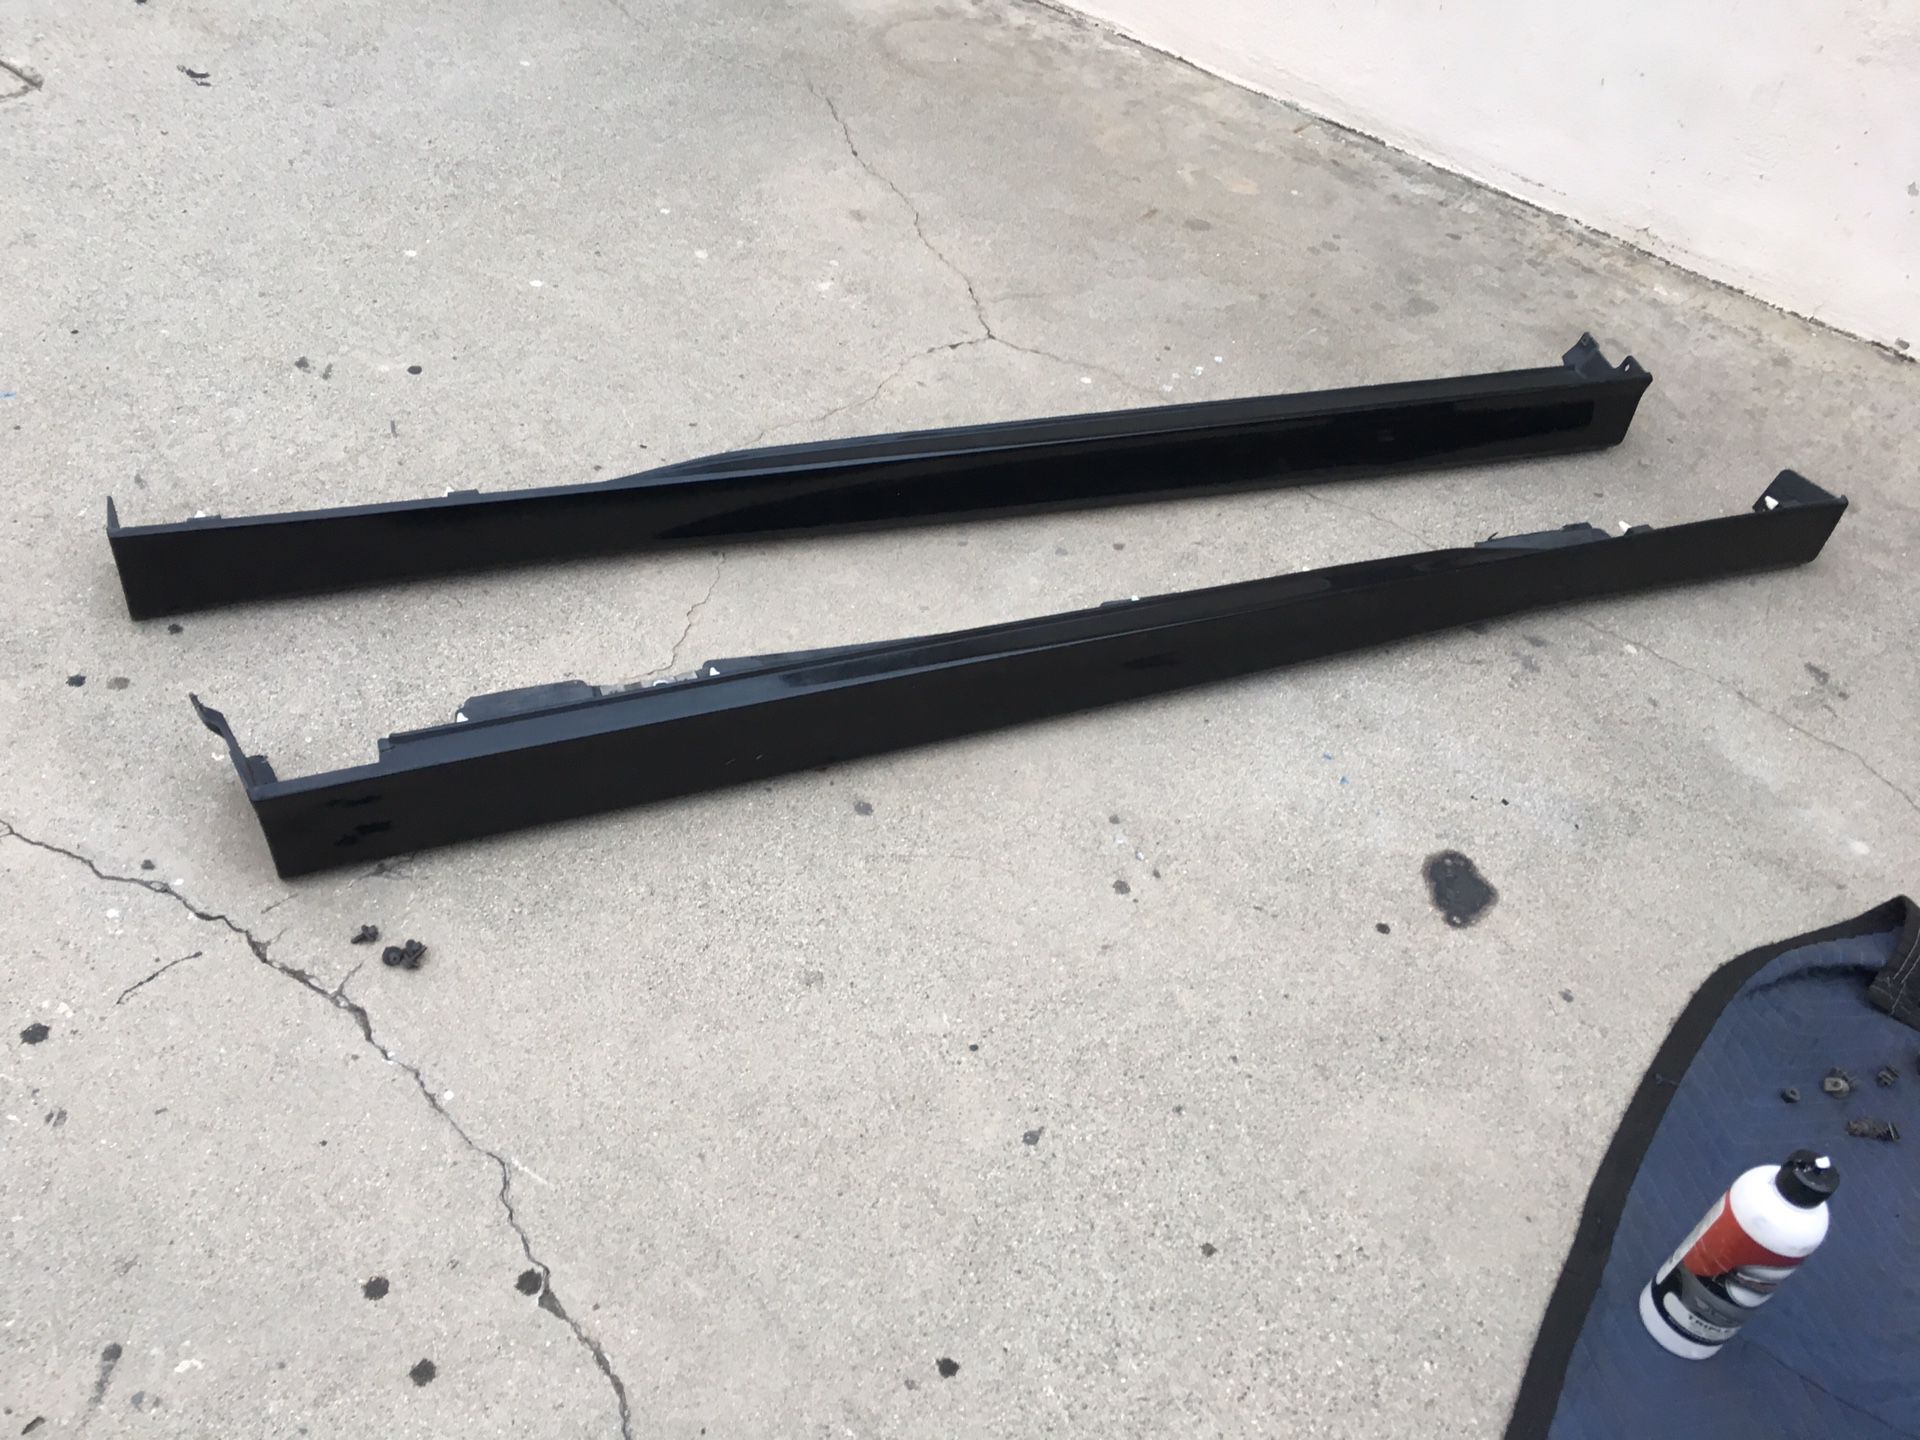 02-06 Acura Rsx-A Spec Side Skirts- with hardware included Oem Honda Made in Japan-Rare item to have/Oem Black -Asking $190.00 Firm